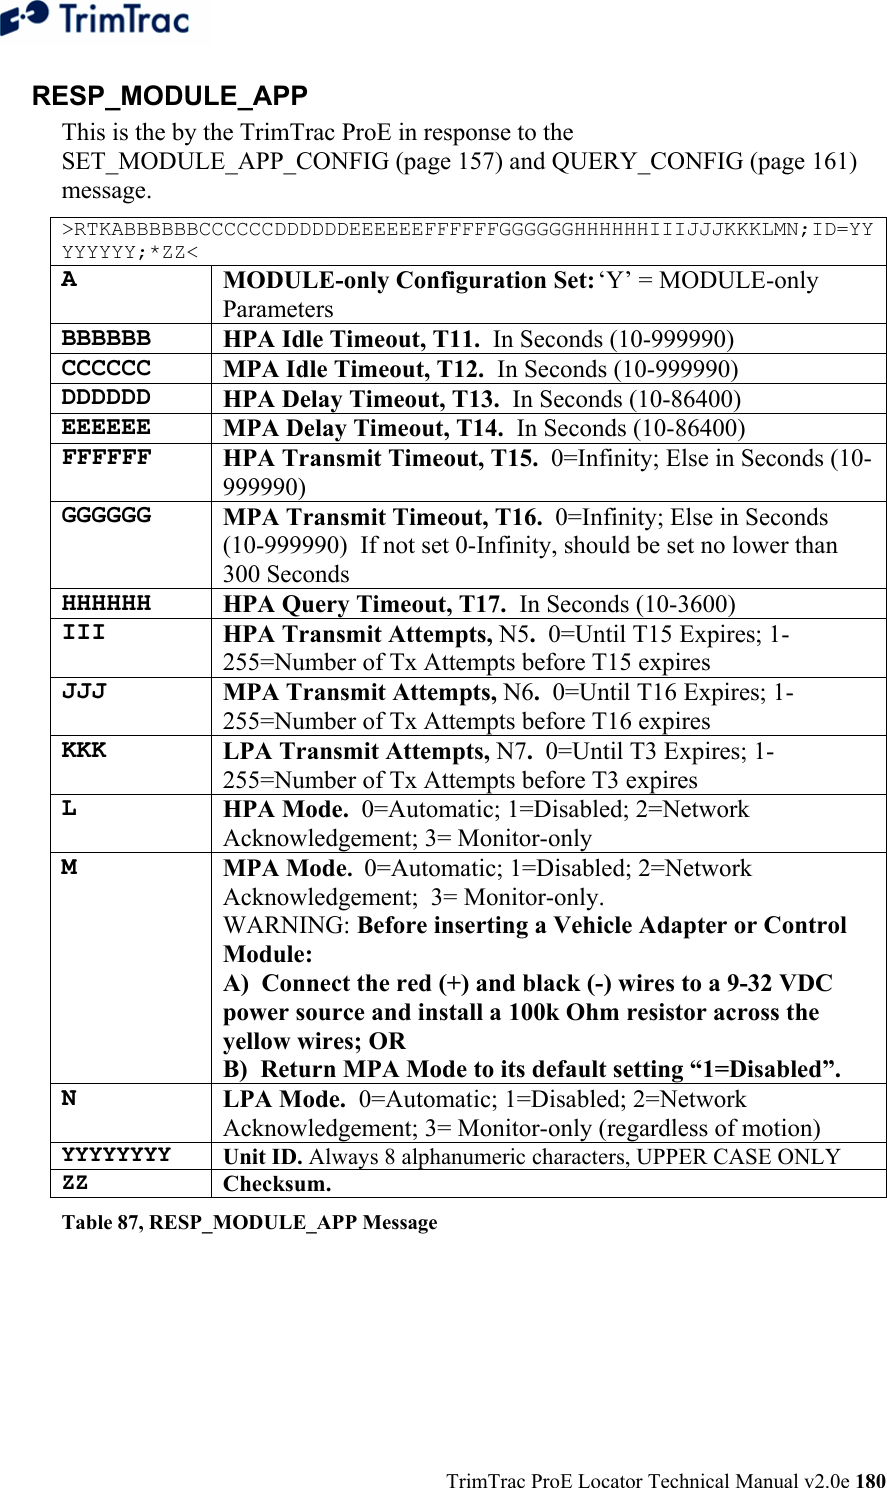  TrimTrac ProE Locator Technical Manual v2.0e 180 RESP_MODULE_APP This is the by the TrimTrac ProE in response to the SET_MODULE_APP_CONFIG (page 157) and QUERY_CONFIG (page 161) message. &gt;RTKABBBBBBCCCCCCDDDDDDEEEEEEFFFFFFGGGGGGHHHHHHIIIJJJKKKLMN;ID=YYYYYYYY;*ZZ&lt; A MODULE-only Configuration Set: ‘Y’ = MODULE-only Parameters BBBBBB HPA Idle Timeout, T11.  In Seconds (10-999990) CCCCCC MPA Idle Timeout, T12.  In Seconds (10-999990) DDDDDD HPA Delay Timeout, T13.  In Seconds (10-86400) EEEEEE MPA Delay Timeout, T14.  In Seconds (10-86400) FFFFFF HPA Transmit Timeout, T15.  0=Infinity; Else in Seconds (10-999990) GGGGGG MPA Transmit Timeout, T16.  0=Infinity; Else in Seconds (10-999990)  If not set 0-Infinity, should be set no lower than 300 Seconds HHHHHH HPA Query Timeout, T17.  In Seconds (10-3600) III HPA Transmit Attempts, N5.  0=Until T15 Expires; 1-255=Number of Tx Attempts before T15 expires JJJ MPA Transmit Attempts, N6.  0=Until T16 Expires; 1-255=Number of Tx Attempts before T16 expires KKK LPA Transmit Attempts, N7.  0=Until T3 Expires; 1-255=Number of Tx Attempts before T3 expires L HPA Mode.  0=Automatic; 1=Disabled; 2=Network Acknowledgement; 3= Monitor-only M MPA Mode.  0=Automatic; 1=Disabled; 2=Network Acknowledgement;  3= Monitor-only.  WARNING: Before inserting a Vehicle Adapter or Control Module: A)  Connect the red (+) and black (-) wires to a 9-32 VDC power source and install a 100k Ohm resistor across the yellow wires; OR B)  Return MPA Mode to its default setting “1=Disabled”. N LPA Mode.  0=Automatic; 1=Disabled; 2=Network Acknowledgement; 3= Monitor-only (regardless of motion) YYYYYYYY  Unit ID. Always 8 alphanumeric characters, UPPER CASE ONLY ZZ  Checksum.   Table 87, RESP_MODULE_APP Message 